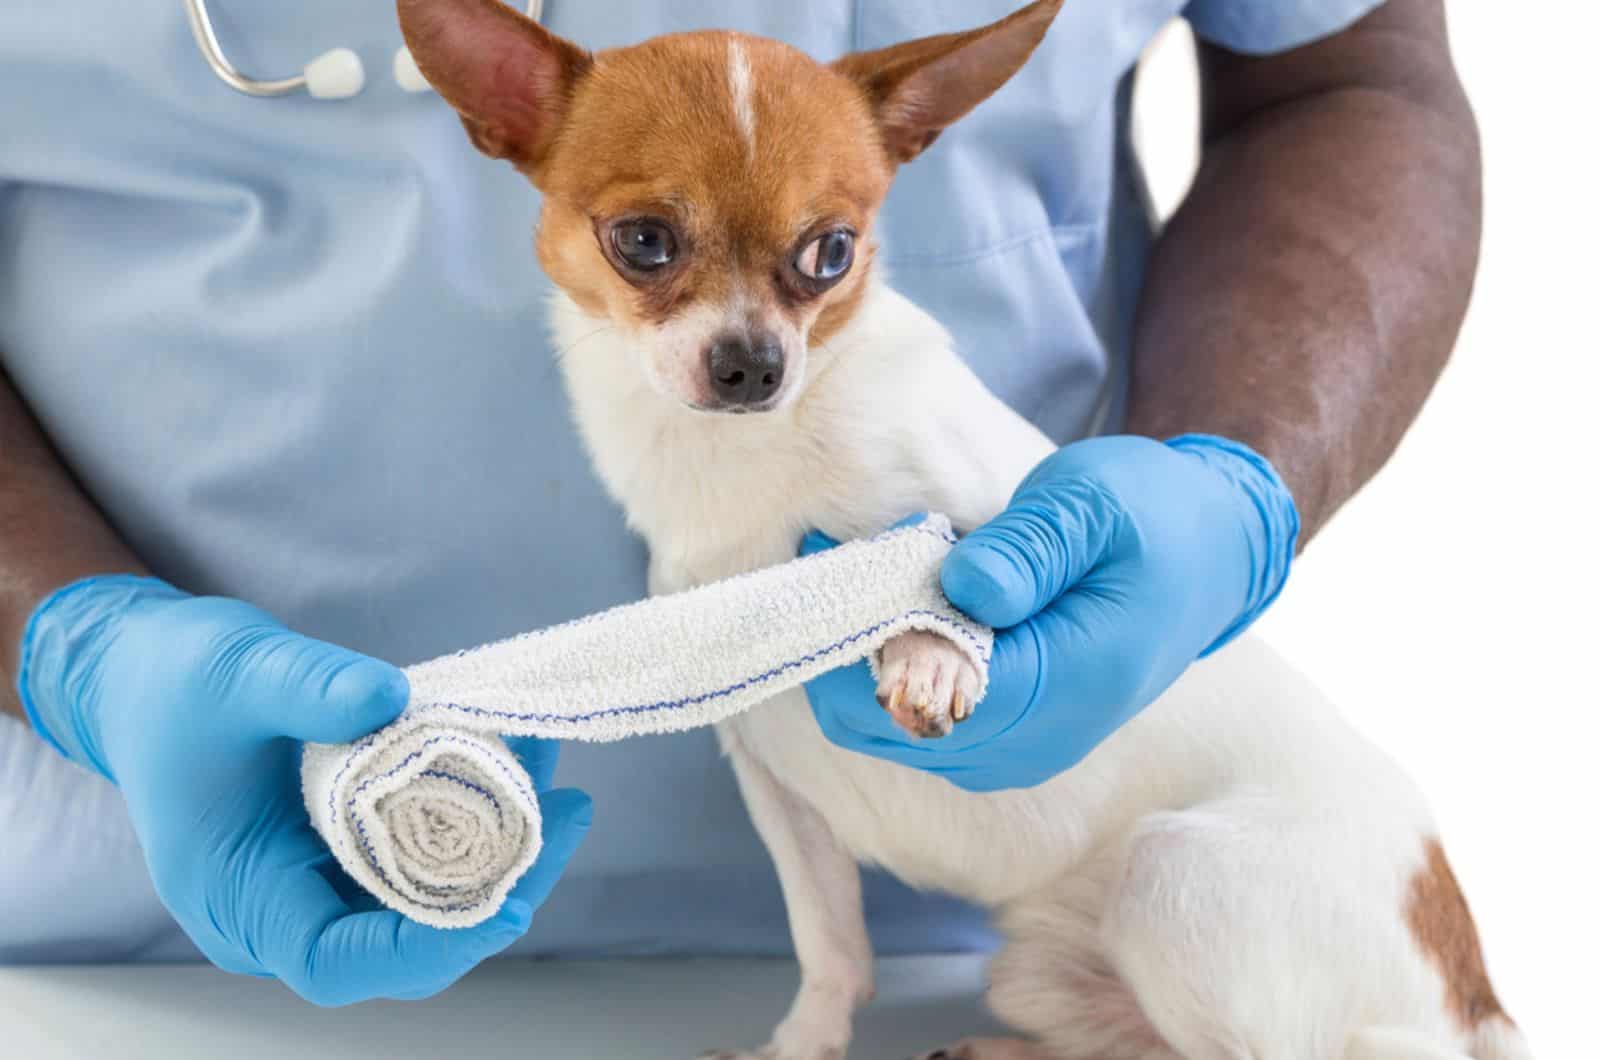 vet wrapping a bandage around a chihuahua's paw at clinic